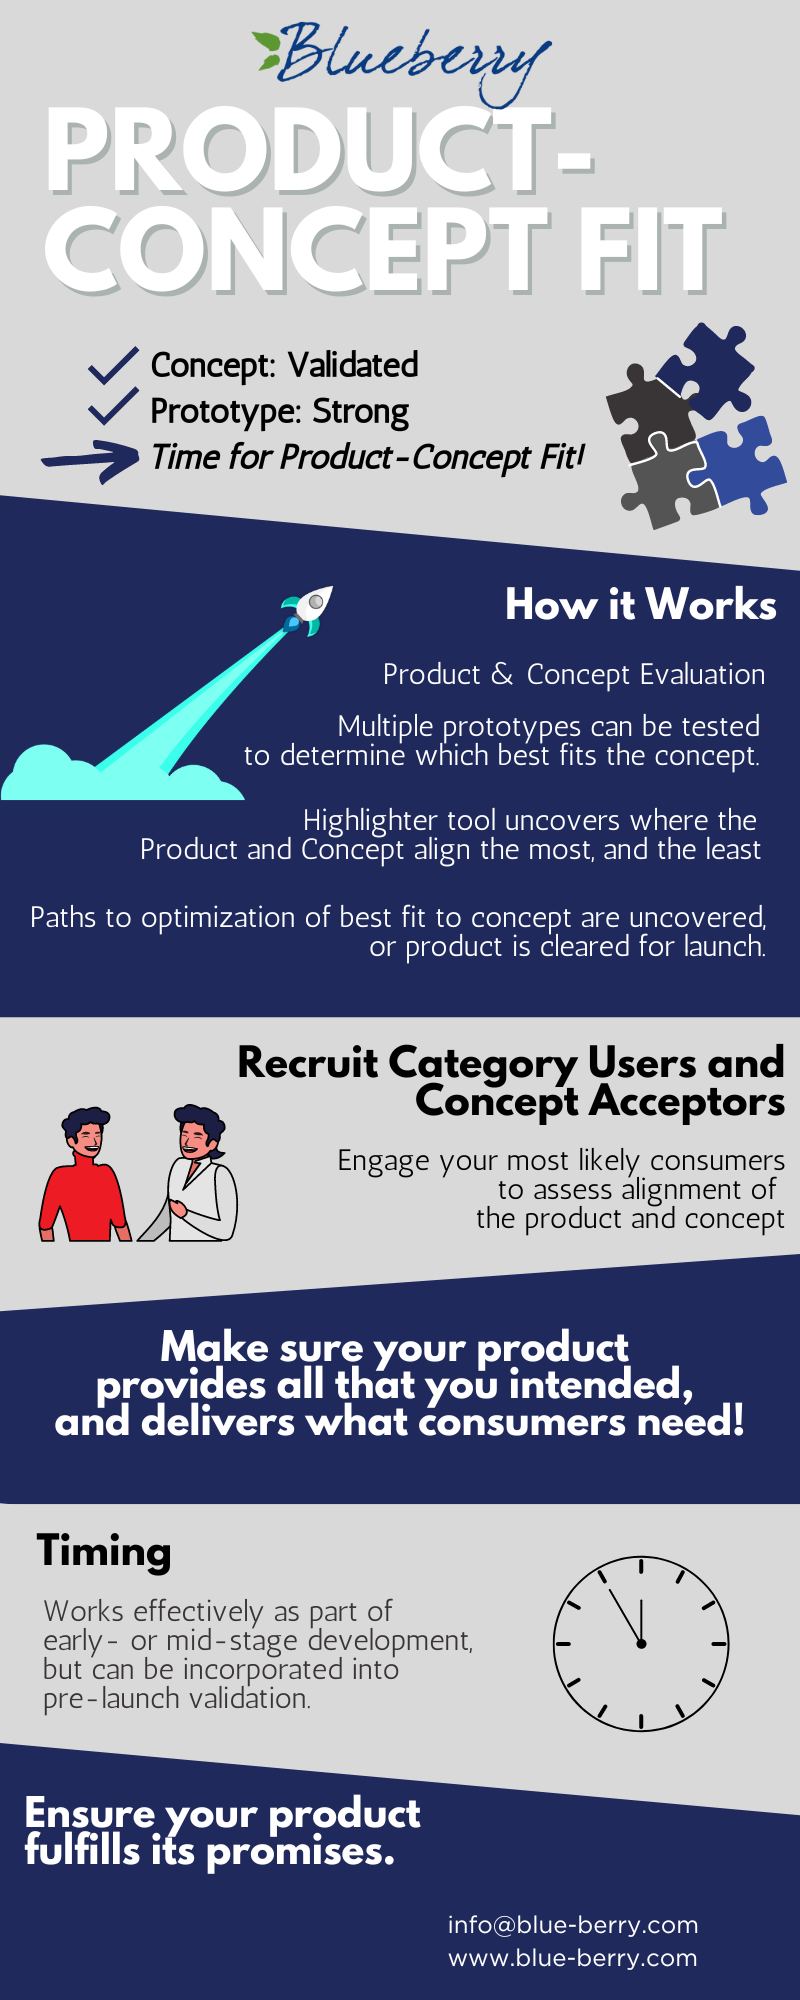 product concept fit - an infographic